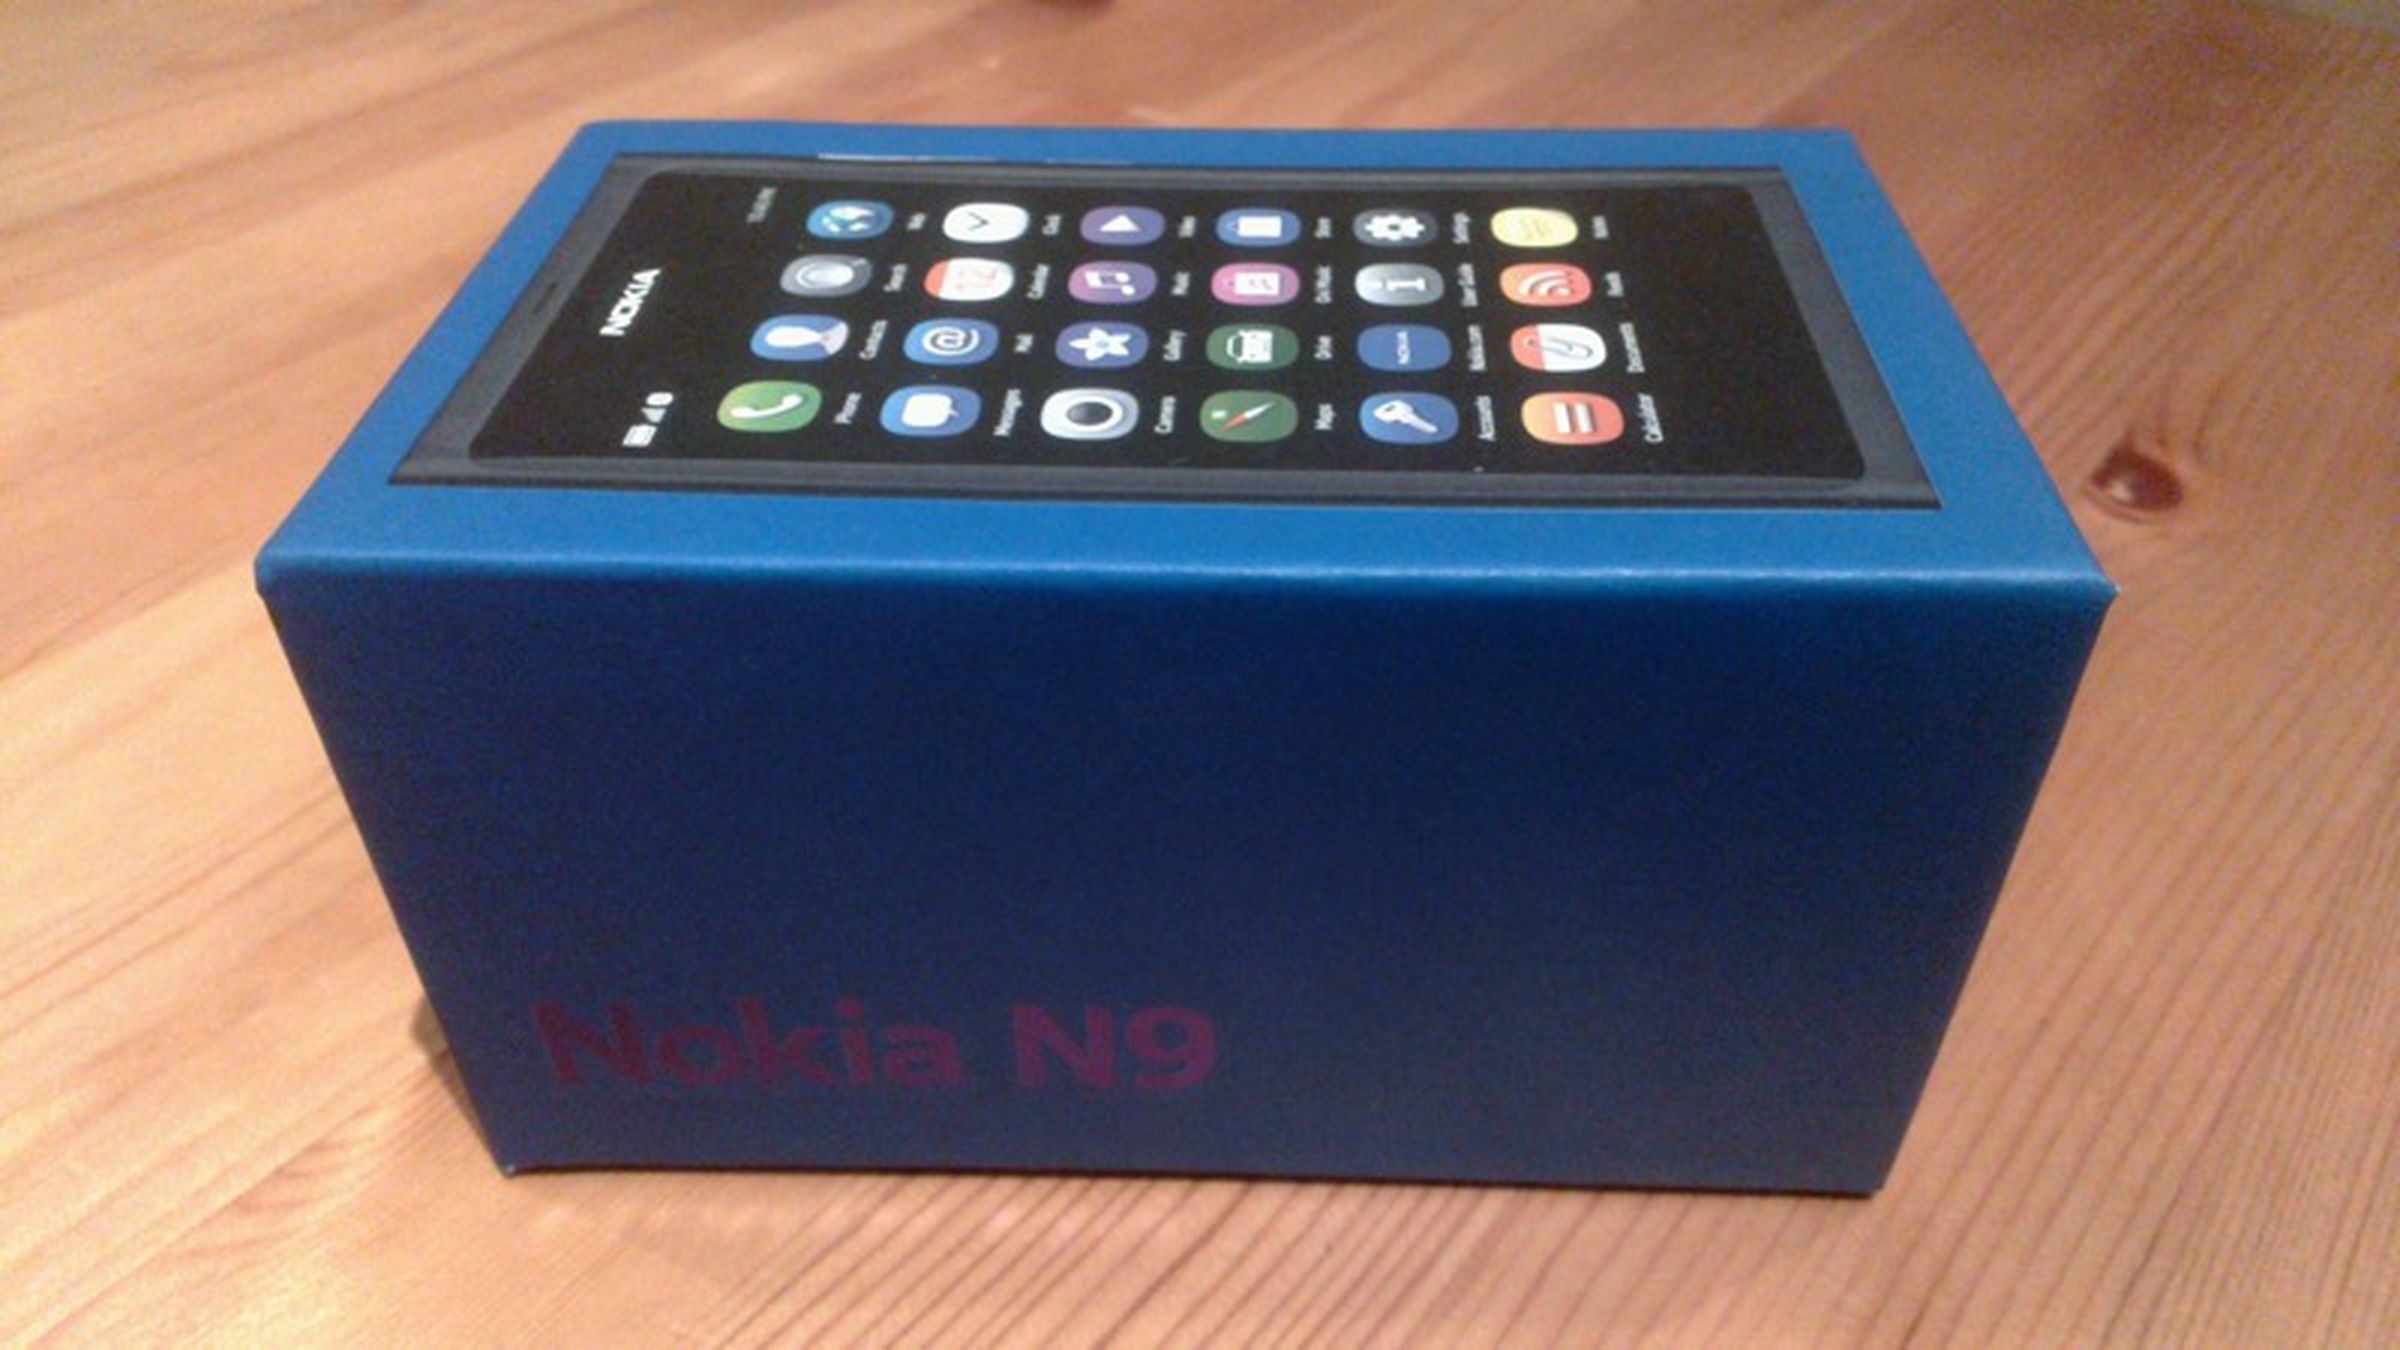 Nokia N9 review sample pictures